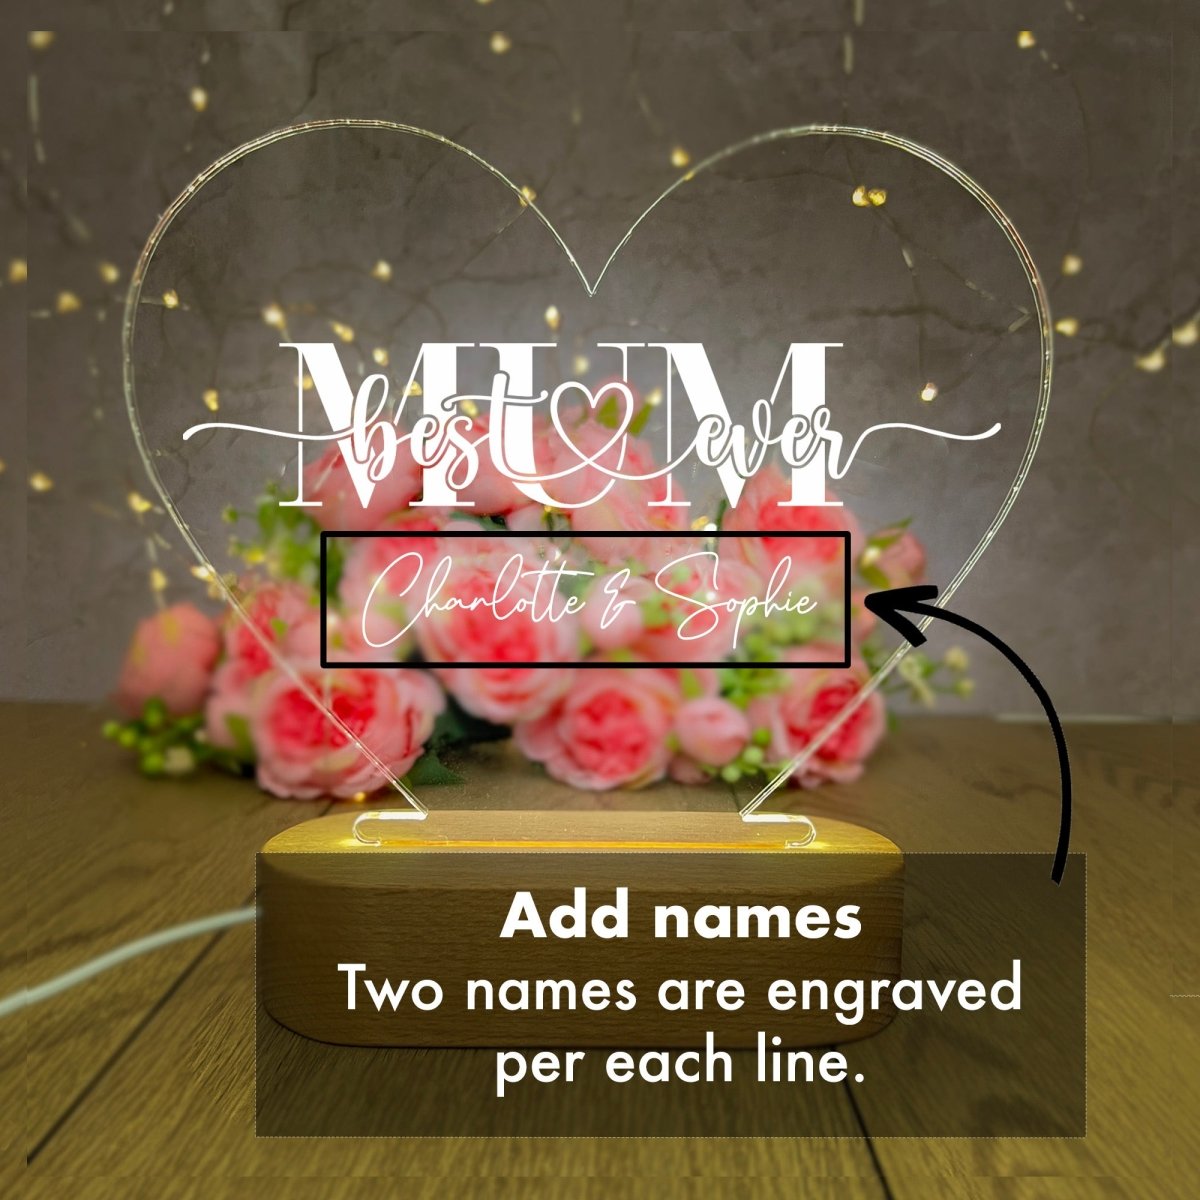 Personalised Gifts For Mum | Best Mum Ever Heart | LED Lamp Night Light    Accessories Gifts UK